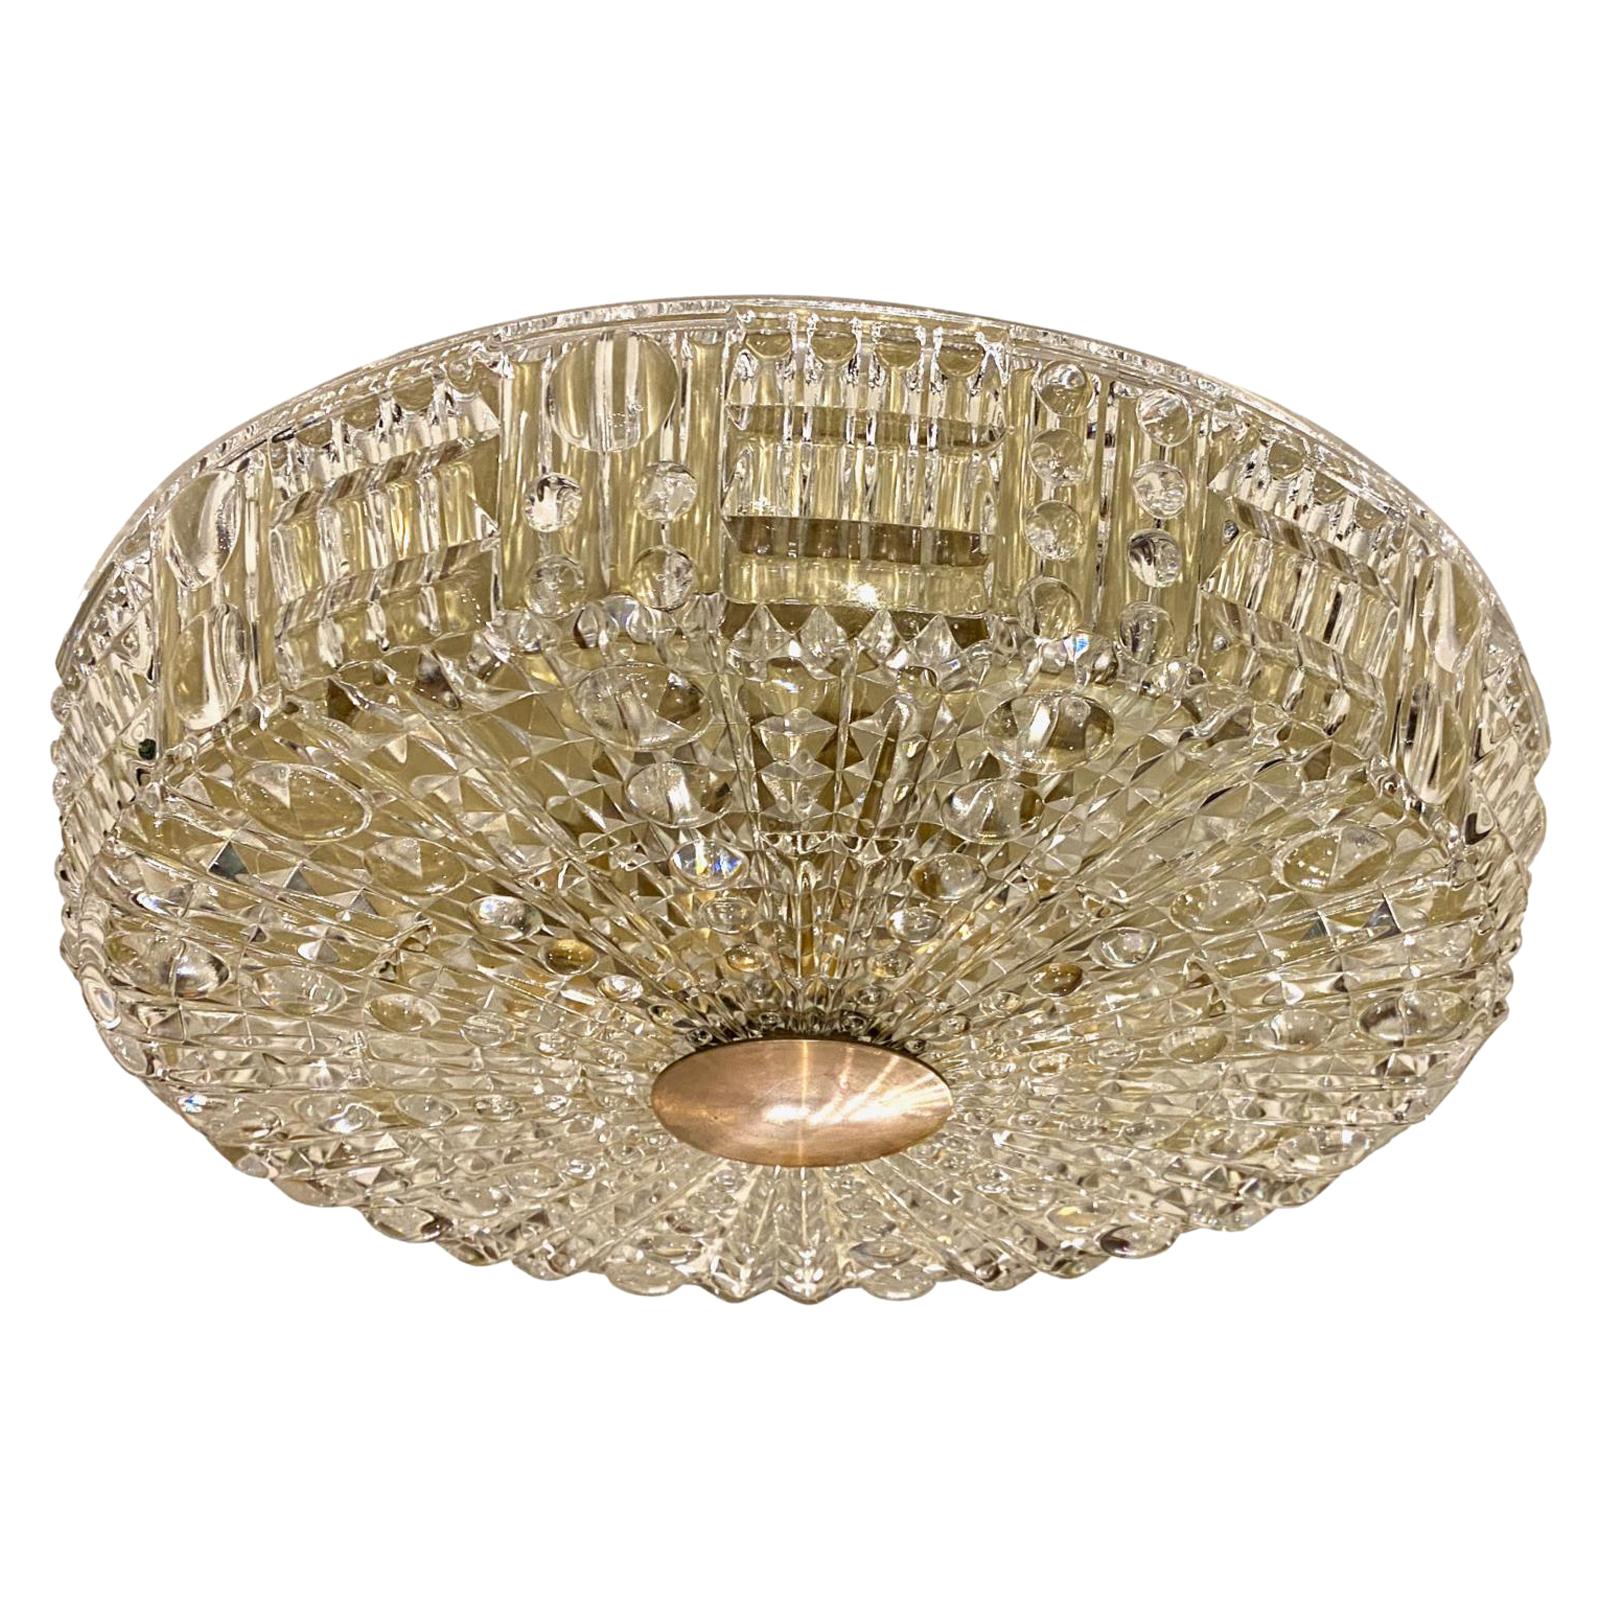 A circa 1960's Swedish molded and textured glass flush-mounted ceiling fixture with six interior lights and bronze detail.

Measurements:
Drop 3.75